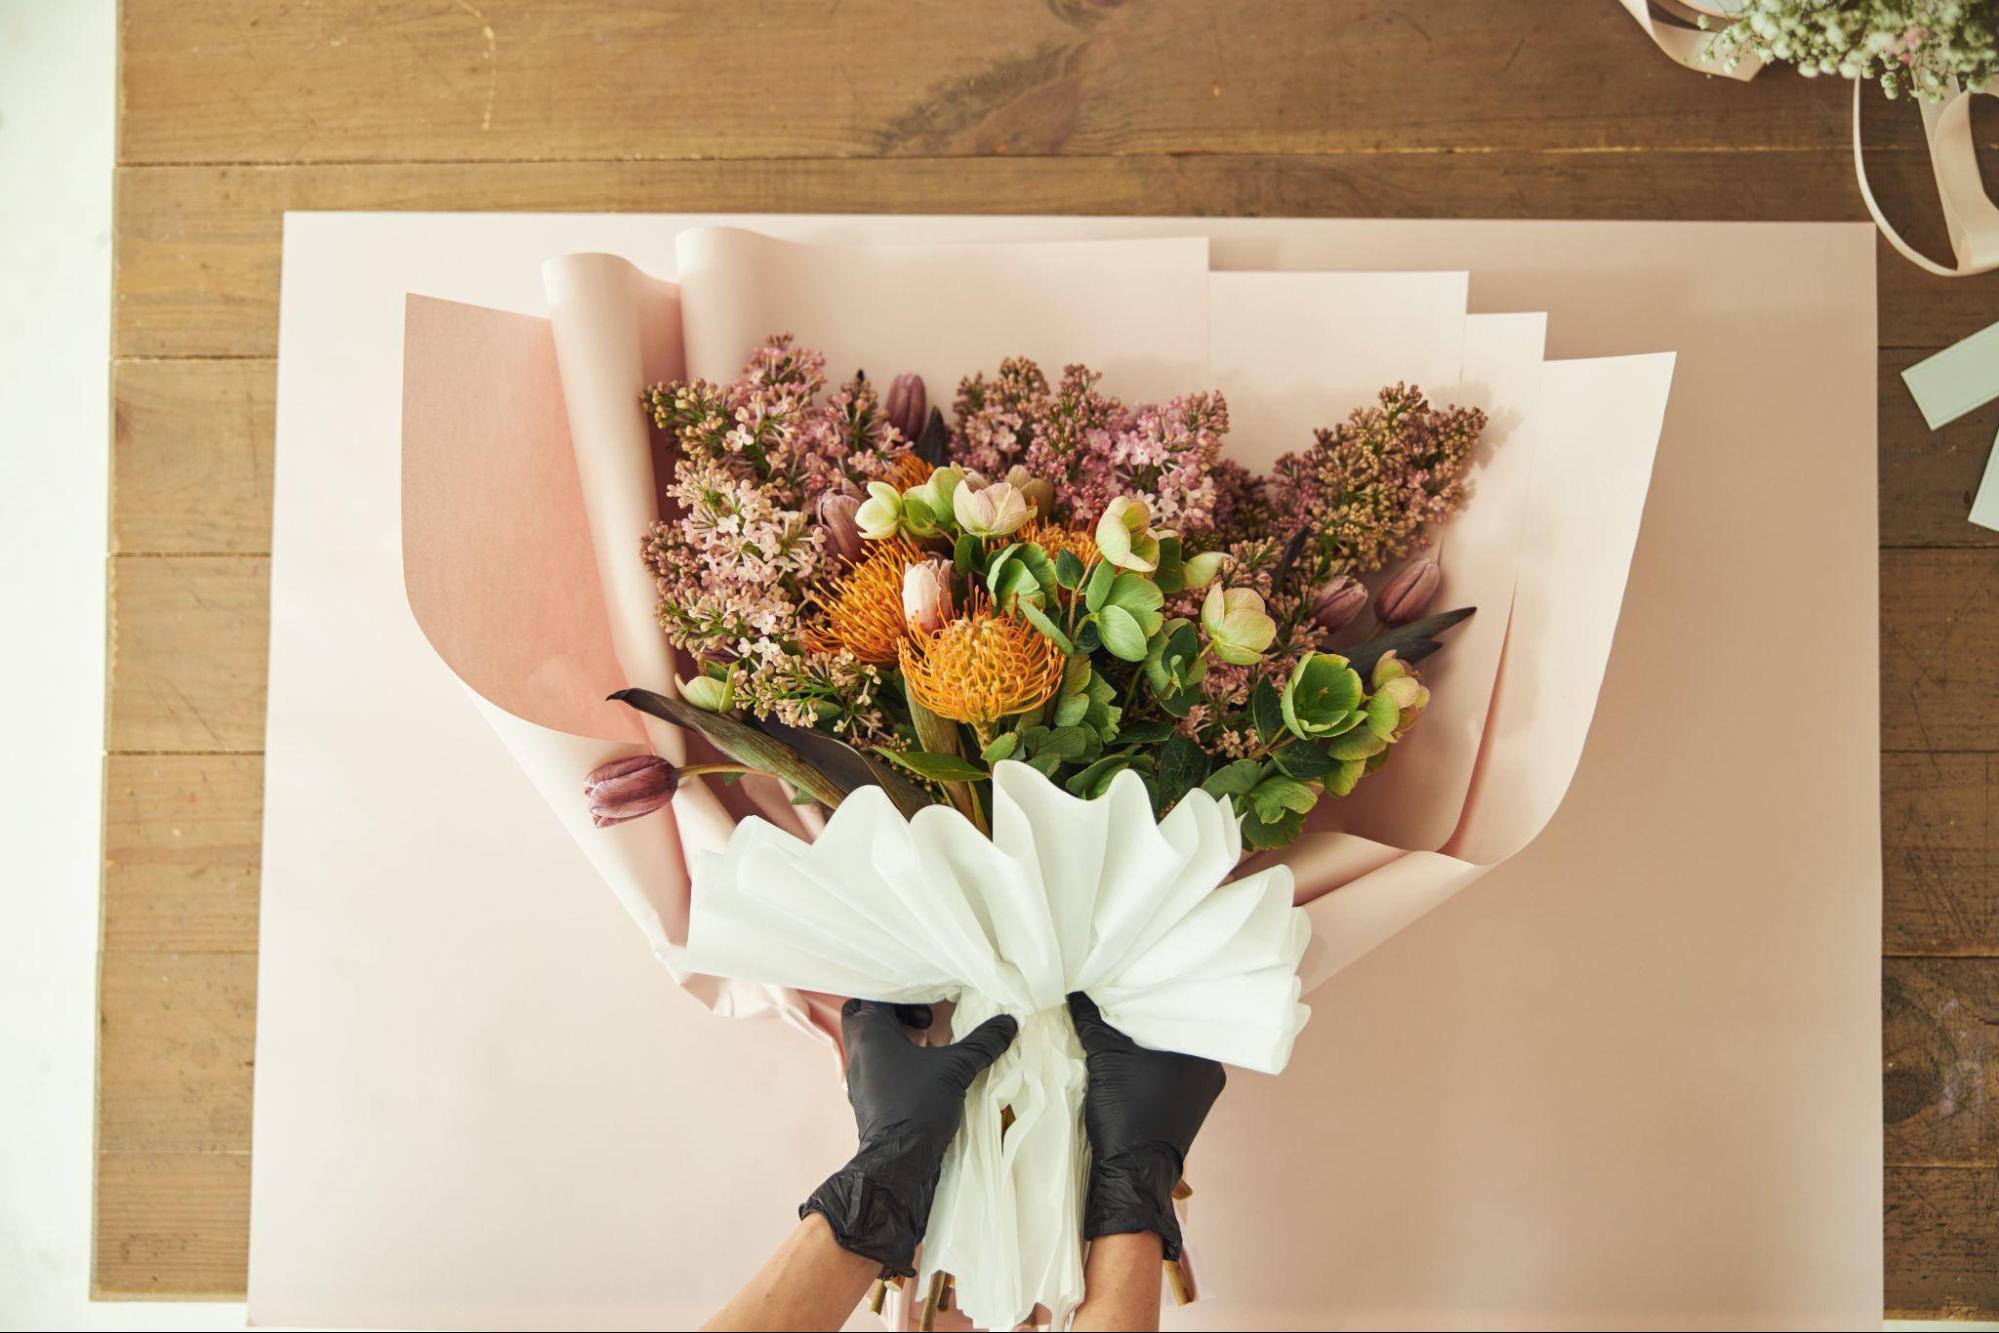 Where Can You Find Affordable Exotic Bouquets in Singapore?